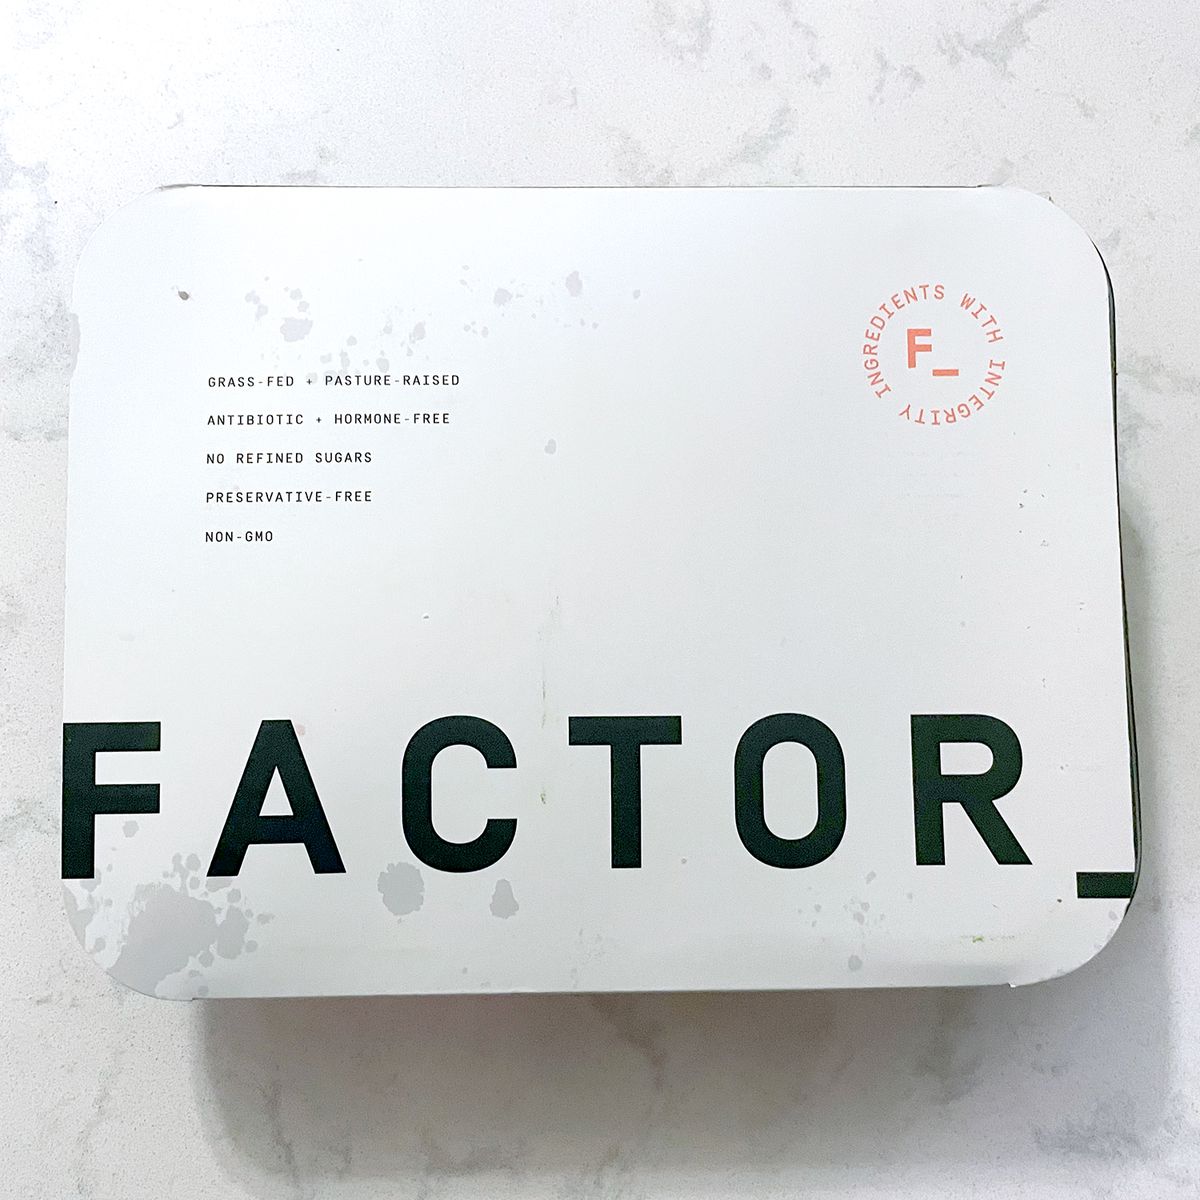 Factor meal delivery